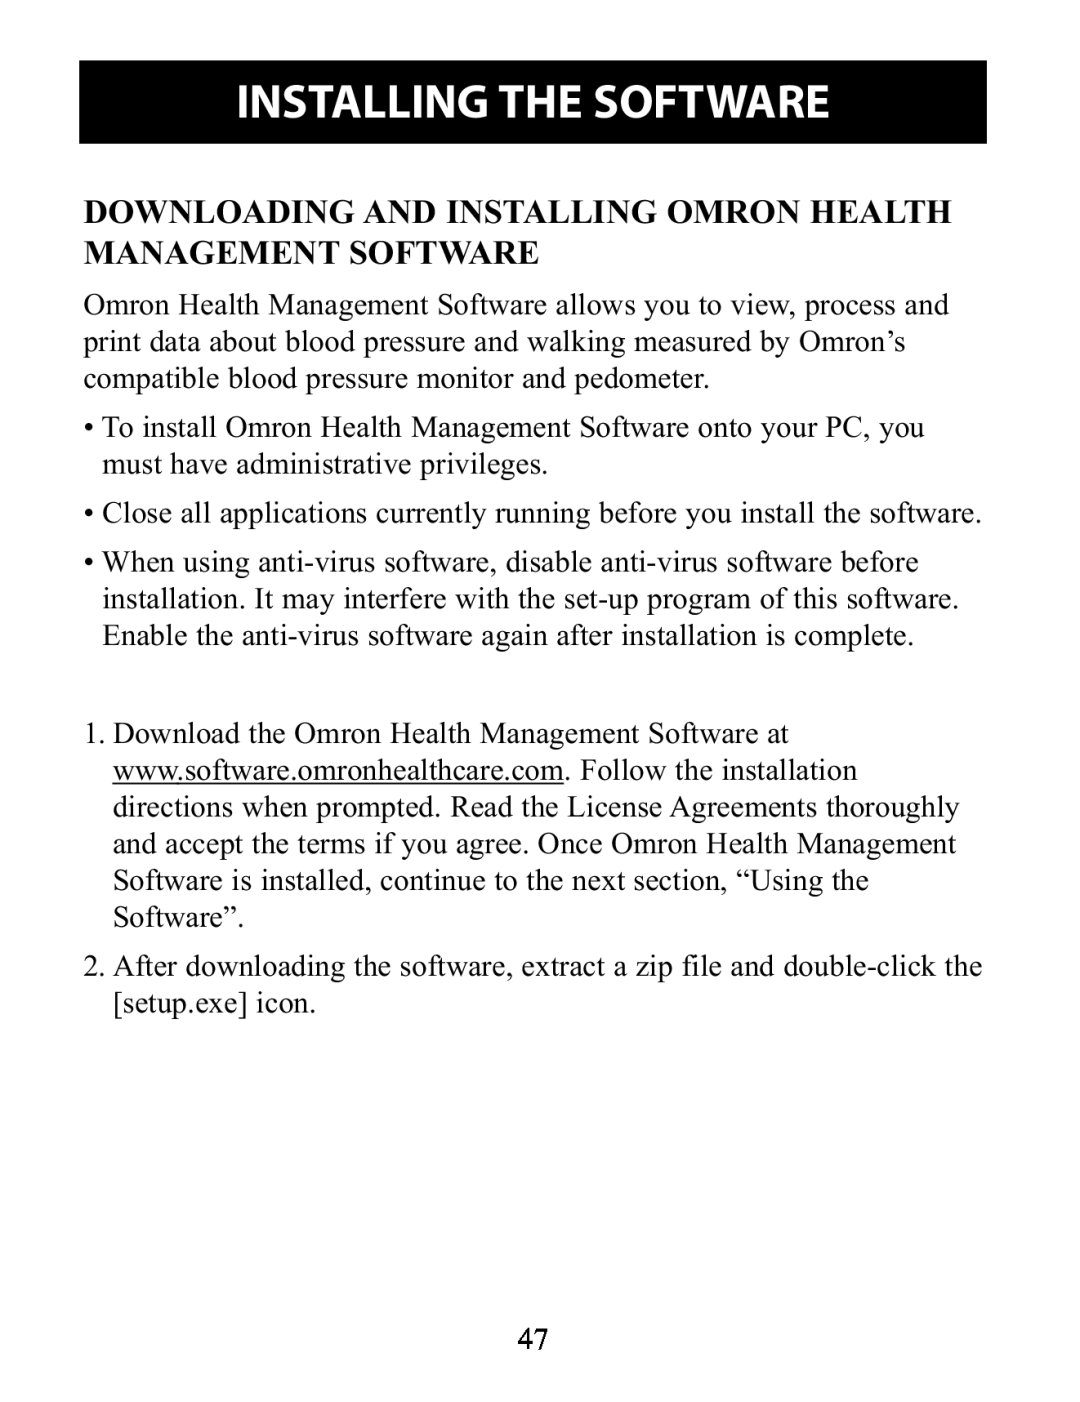 Omron Healthcare BP791IT Downloading And Installing Omron Health Management Software, Installing The Software 